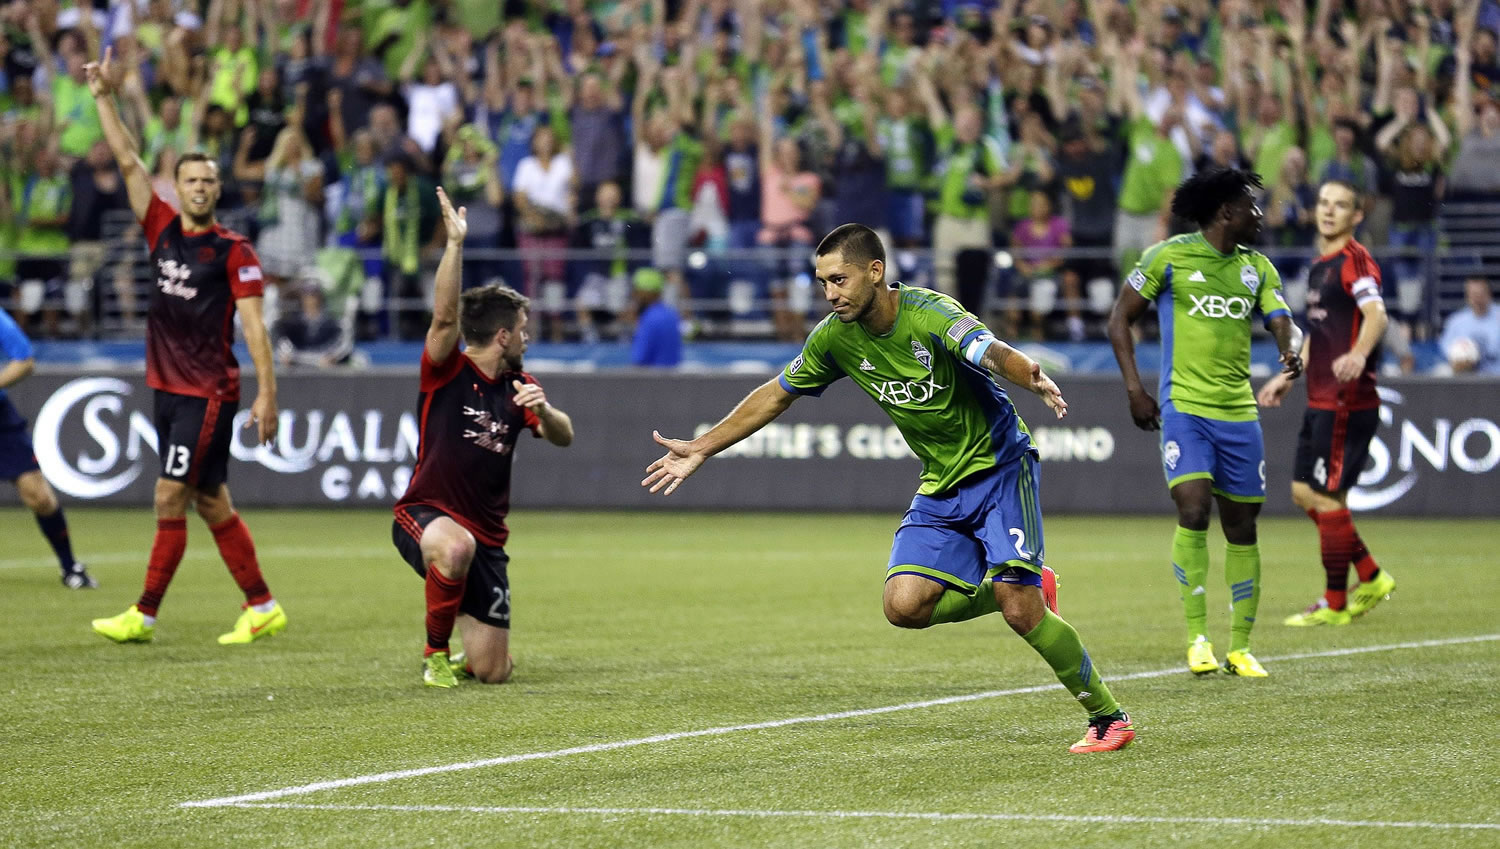 Seattle Sounders' Clint Dempsey, center, celebrates after scoring a goal against the Portland Timbers, in the second half of an MLS soccer match, Sunday, July 13, 2014, in Seattle. (AP Photo/Ted S.